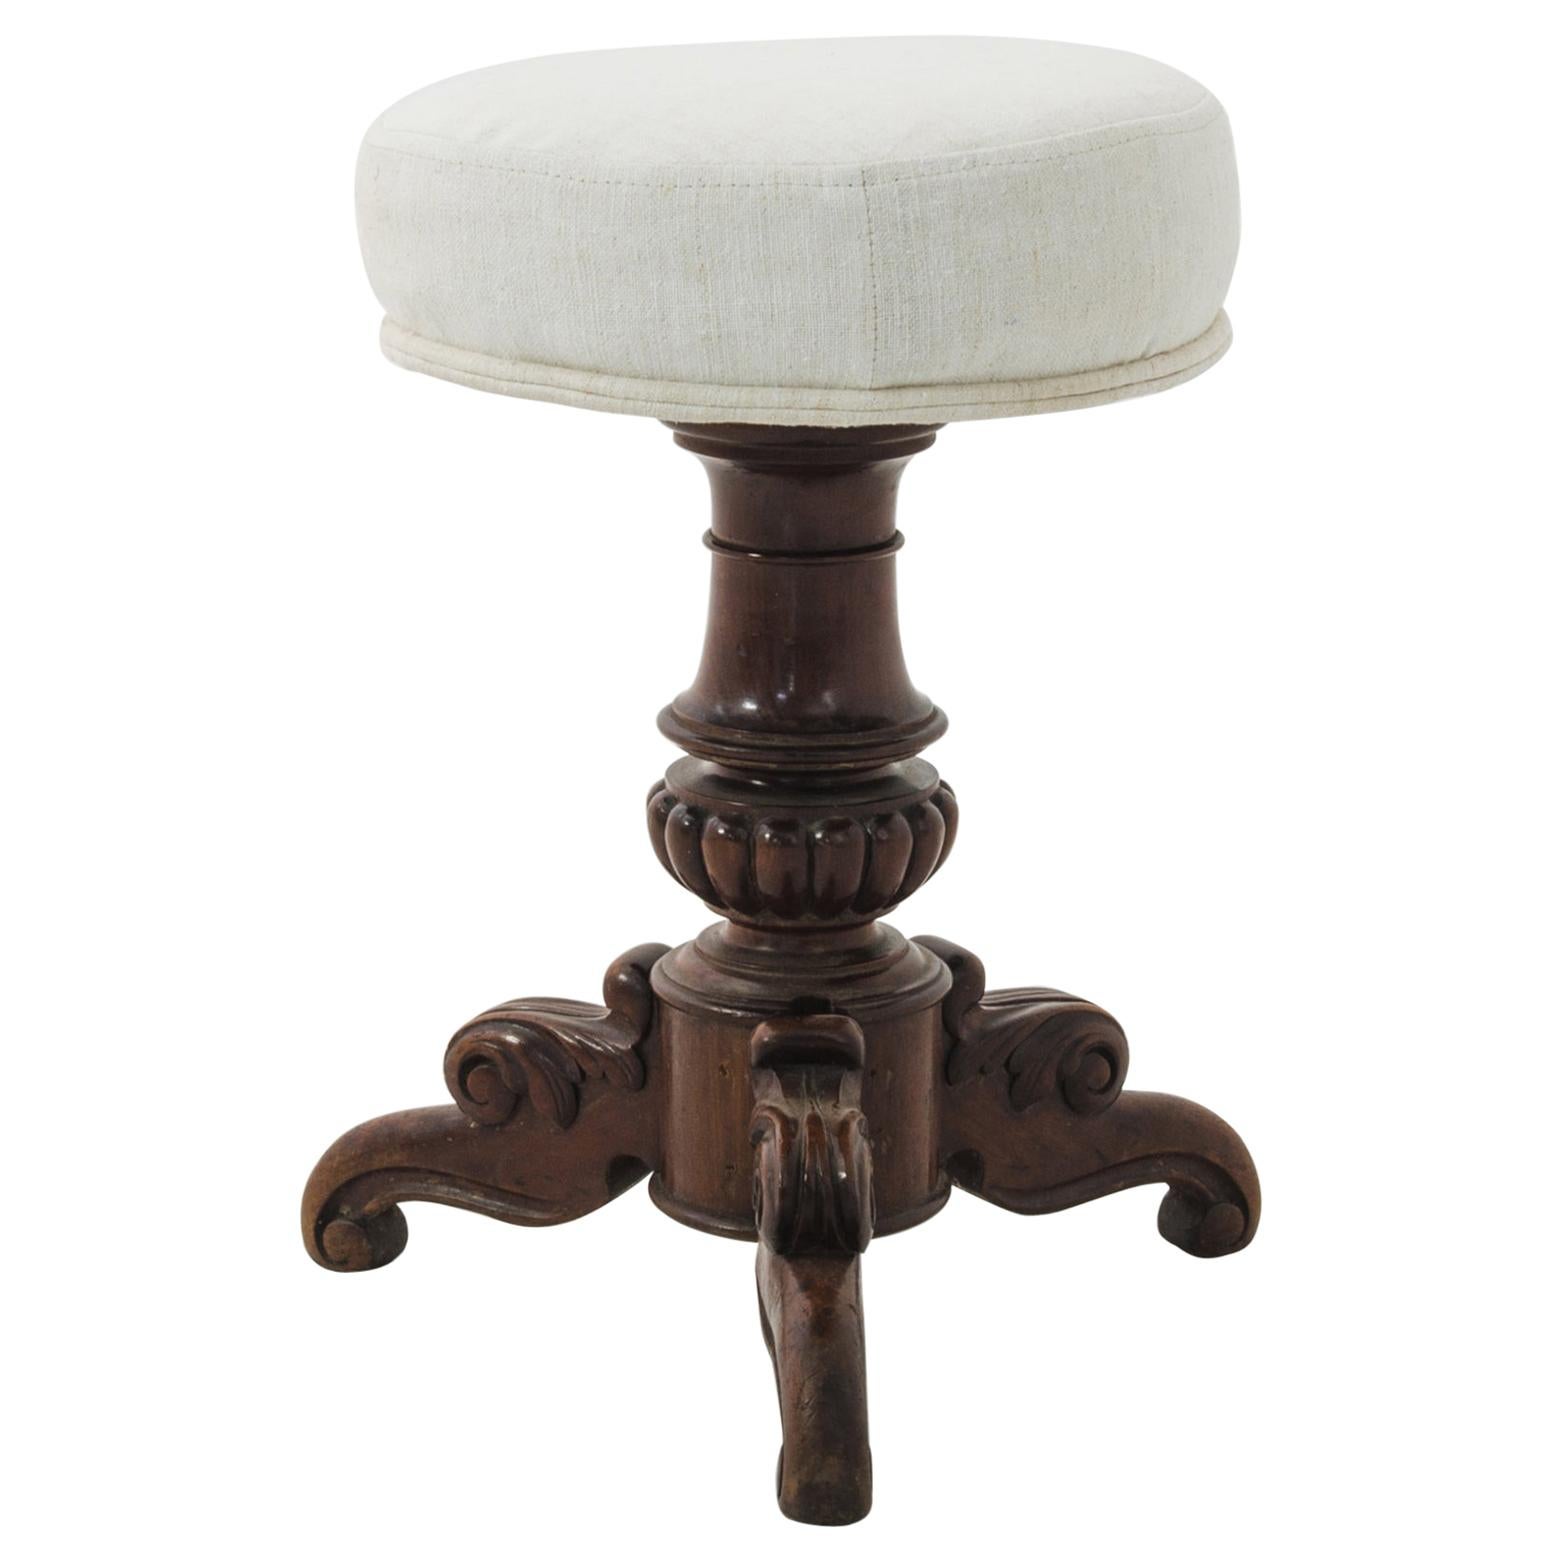 1880s French Wooden Screw Top Stool